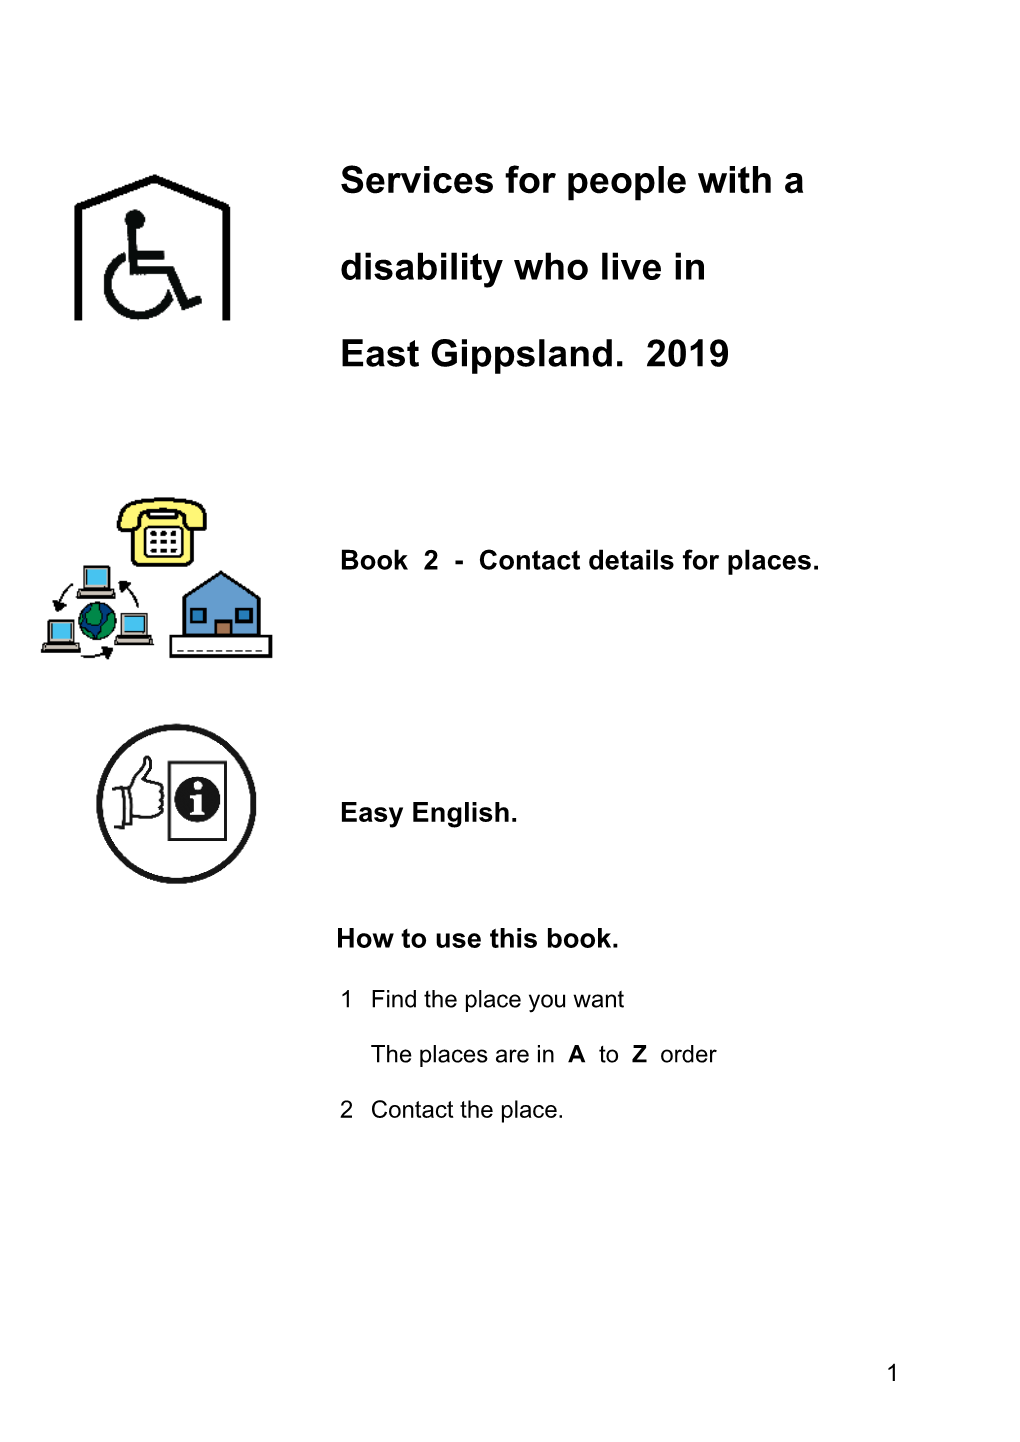 Services for People with a Disability Who Live in East Gippsland